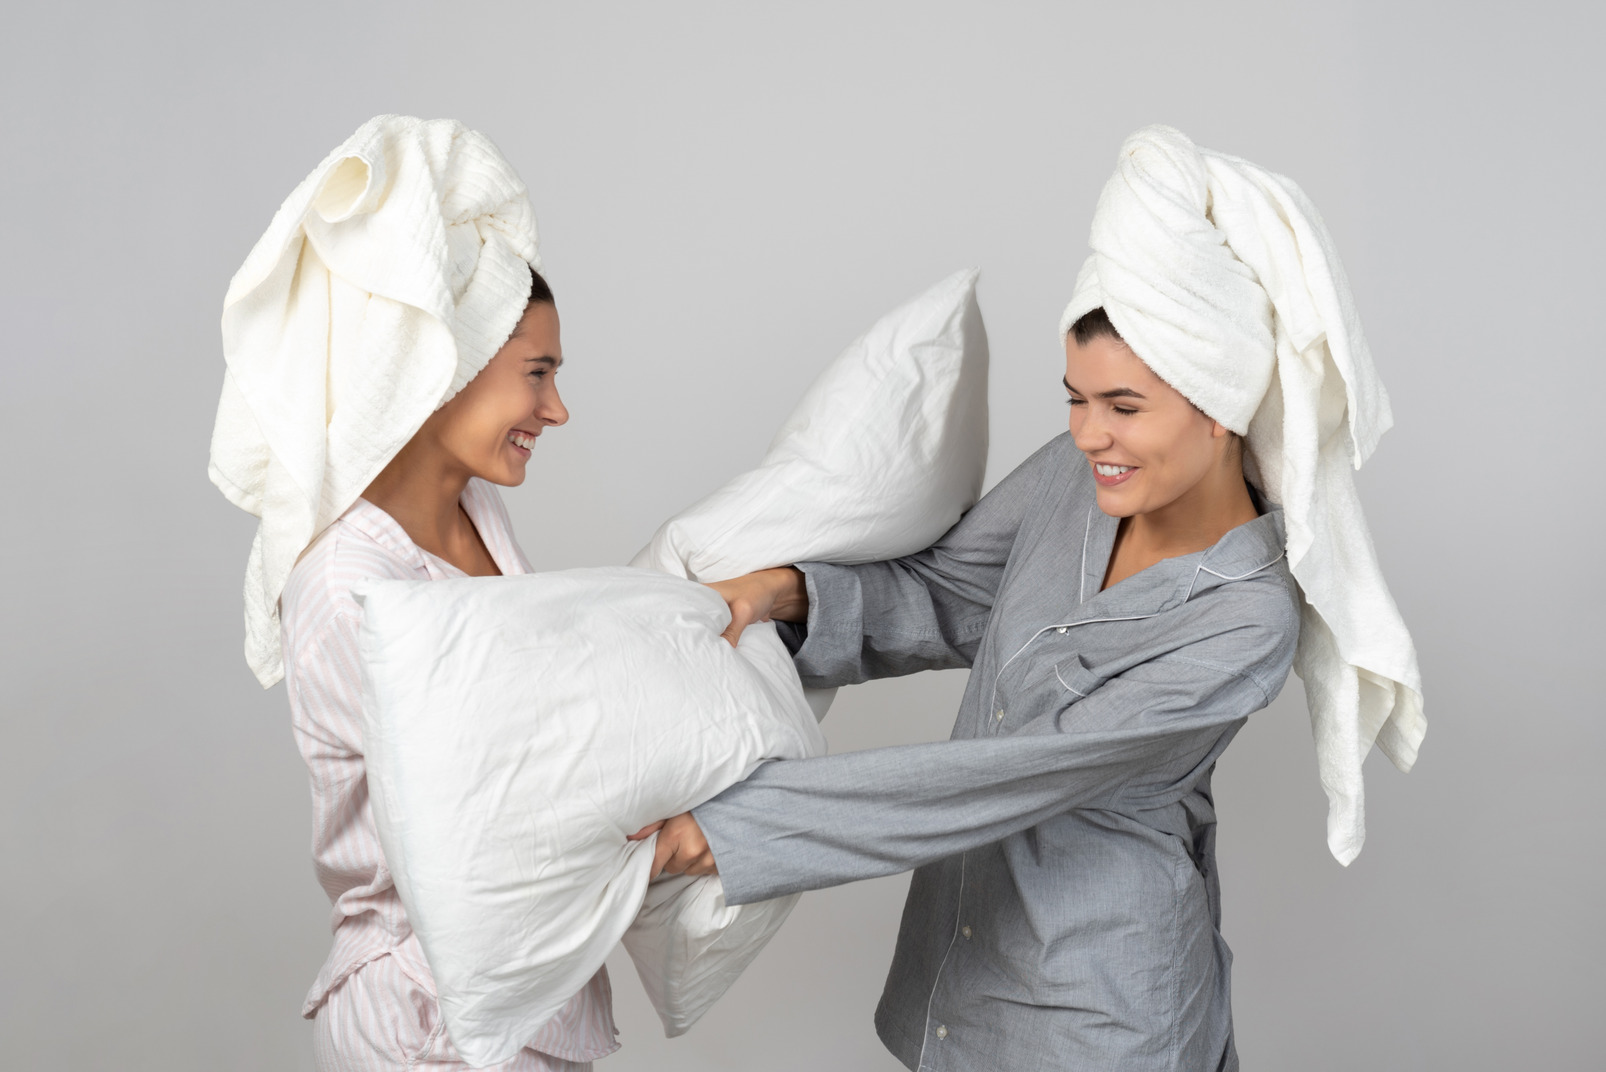 Two young women pillow fighting